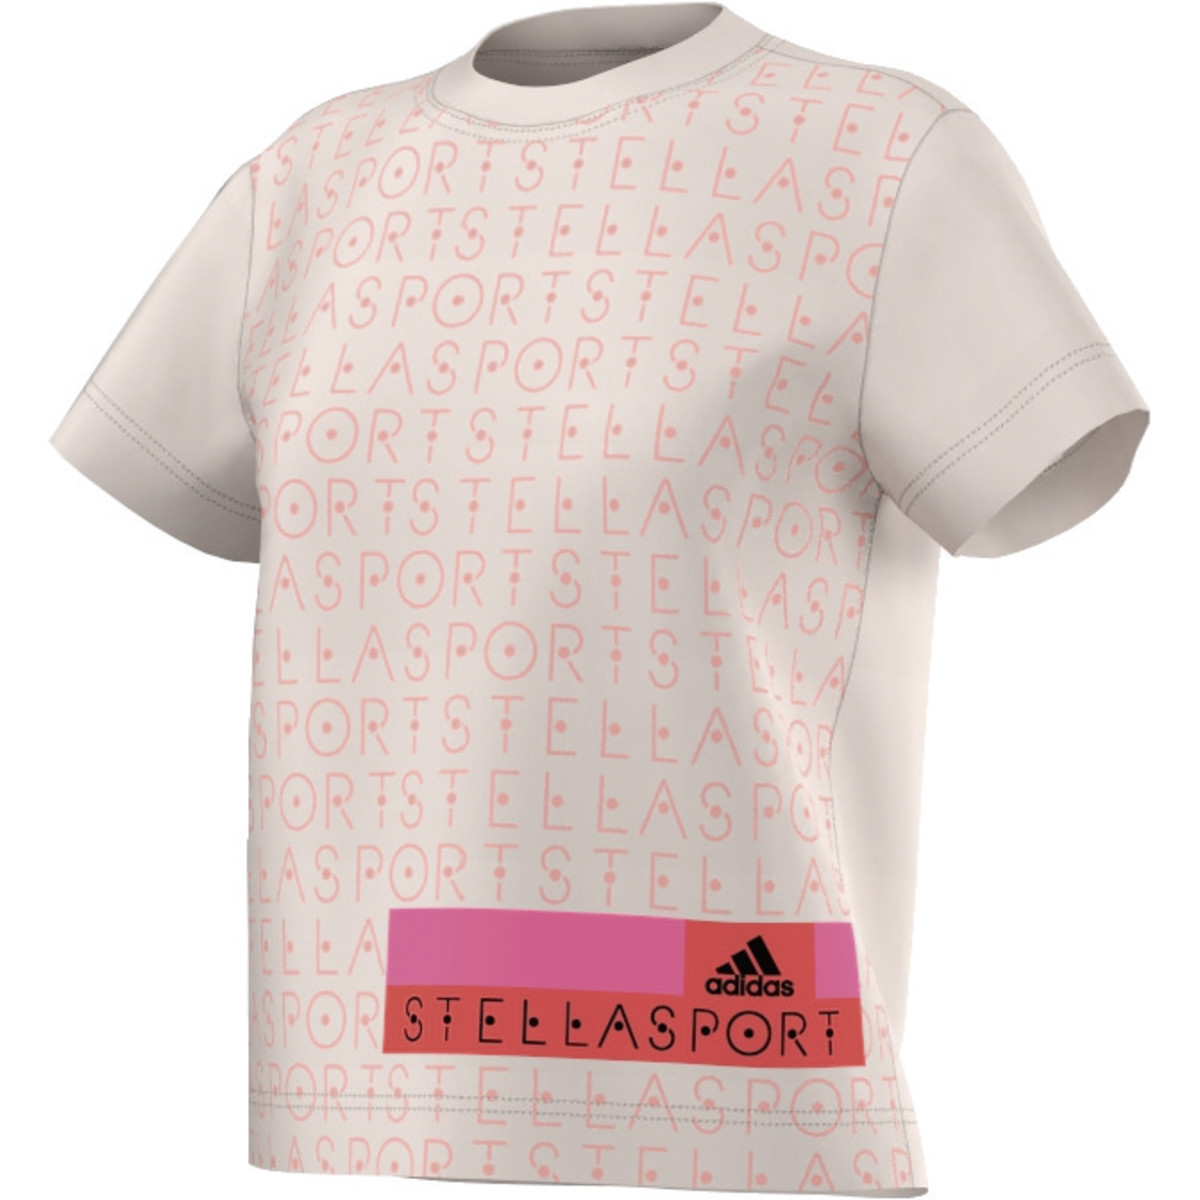 A graphic tee from Stellasport. Photo: Tennis-Point.com